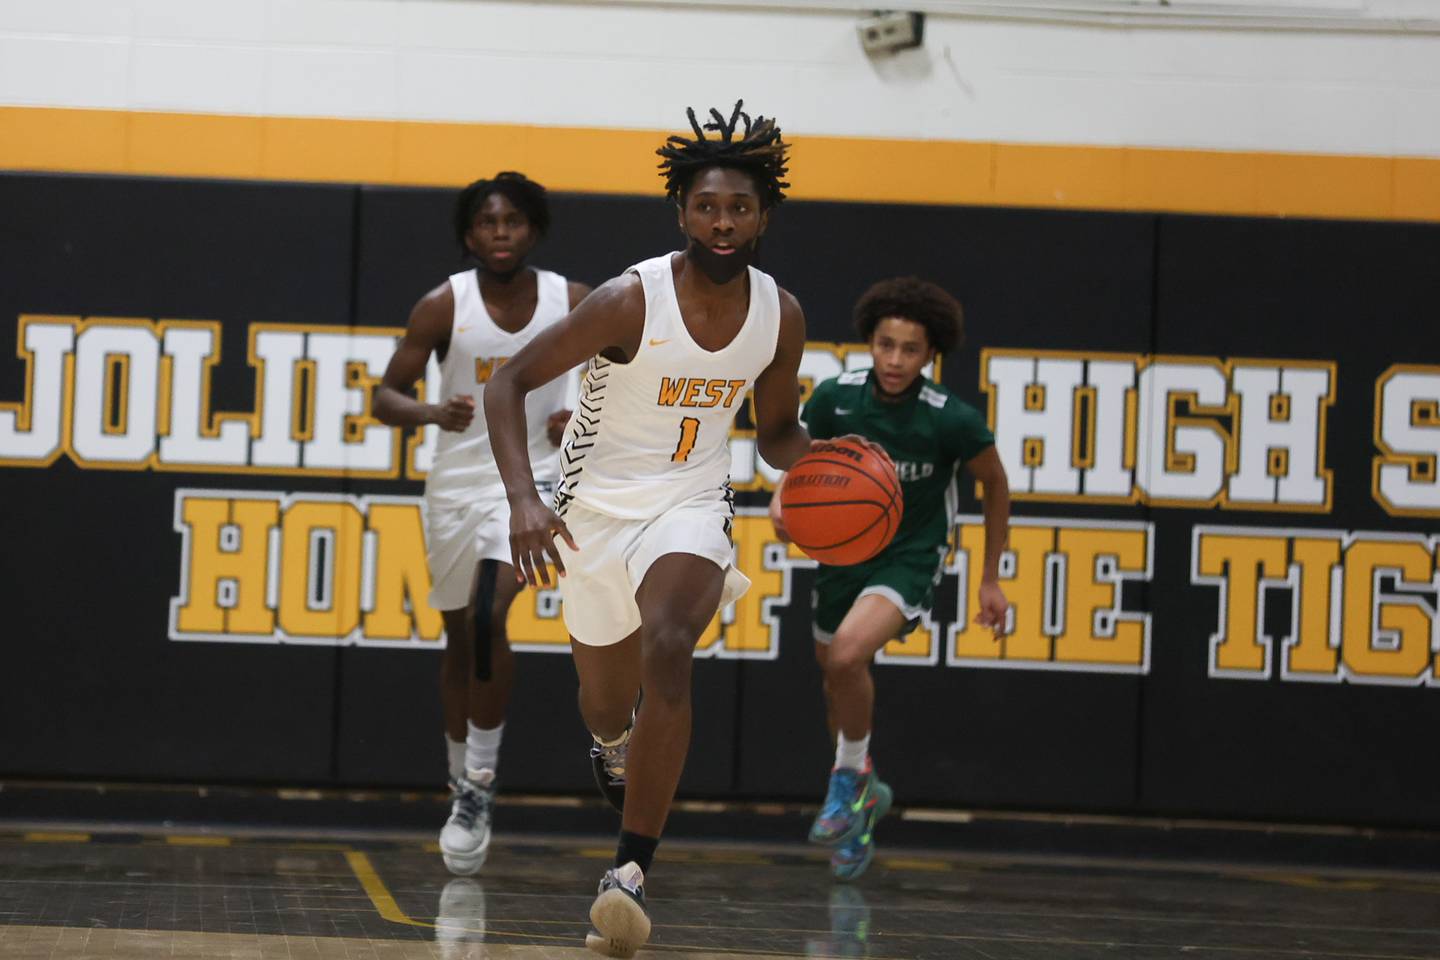 Joliet West’s Justus McNair takes the ball up court against Plainfield Central. Friday, Jan. 28, 2022 in Joliet.